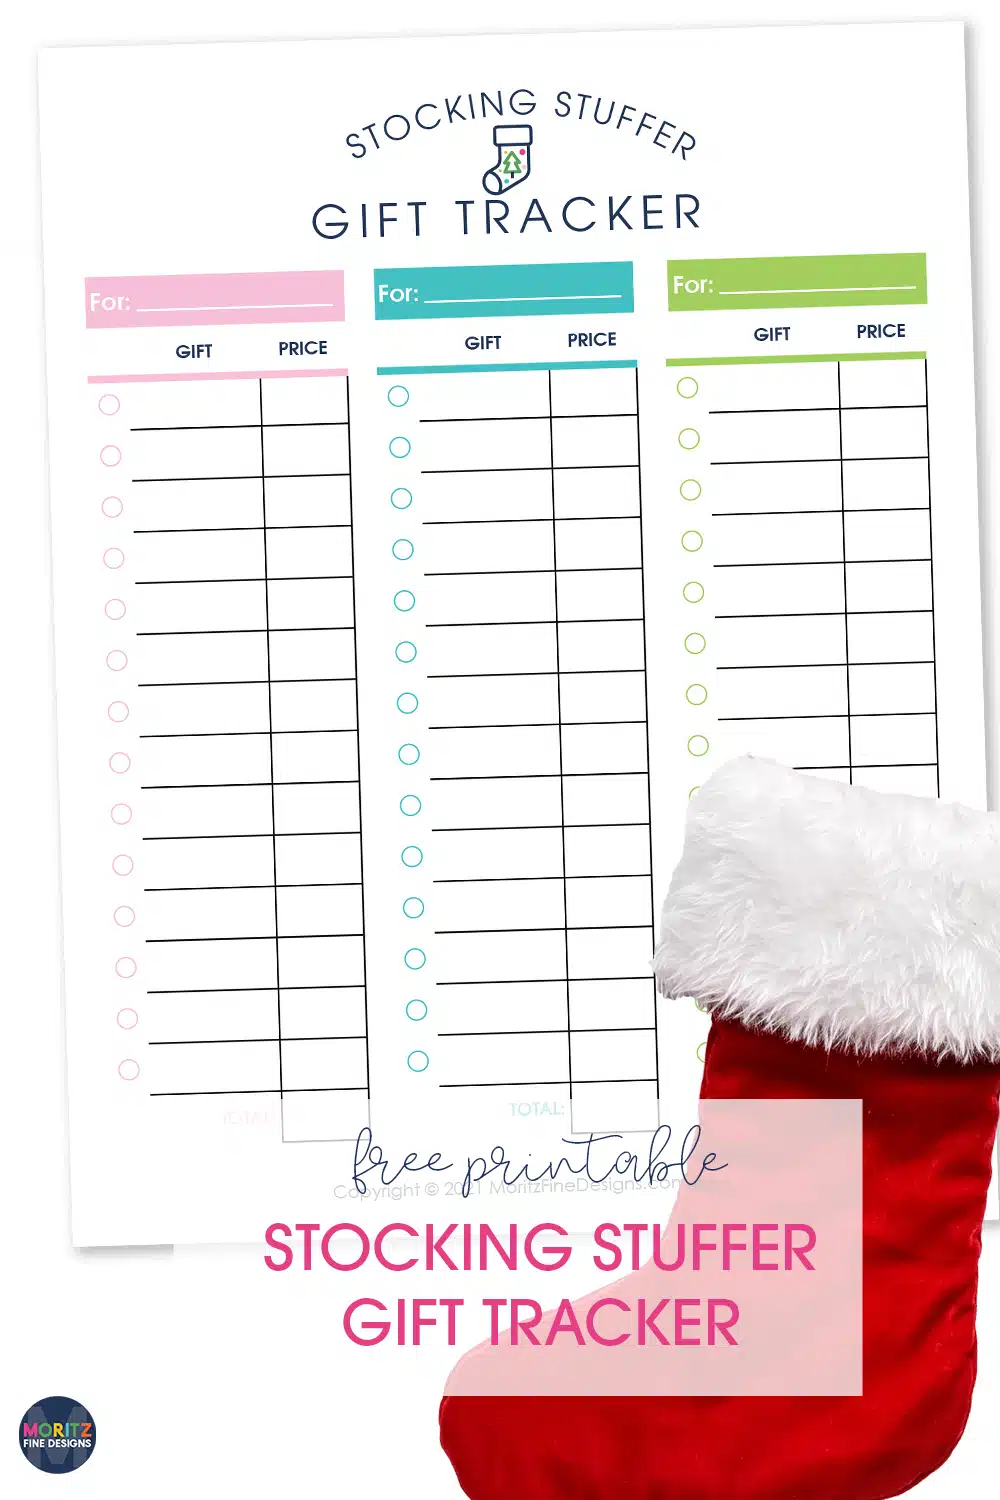 Keep track of all the gifts you purchase for stockings with the free printable Stocking Stuffer Gift Tracker.